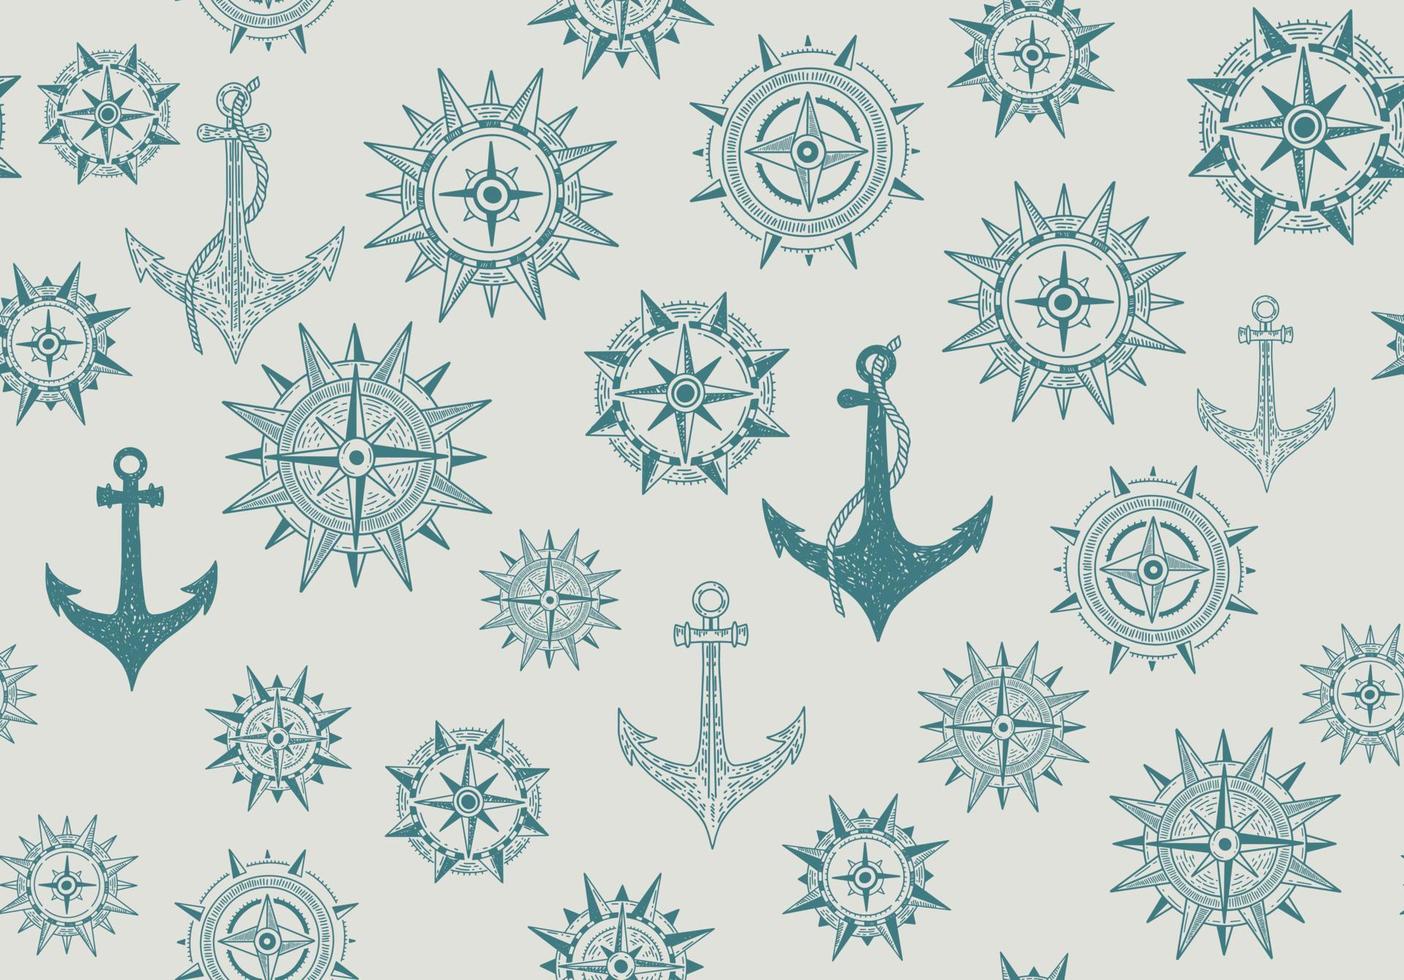 Compass Wind rose, Anchor, pattern, hand drawn Illustration vector